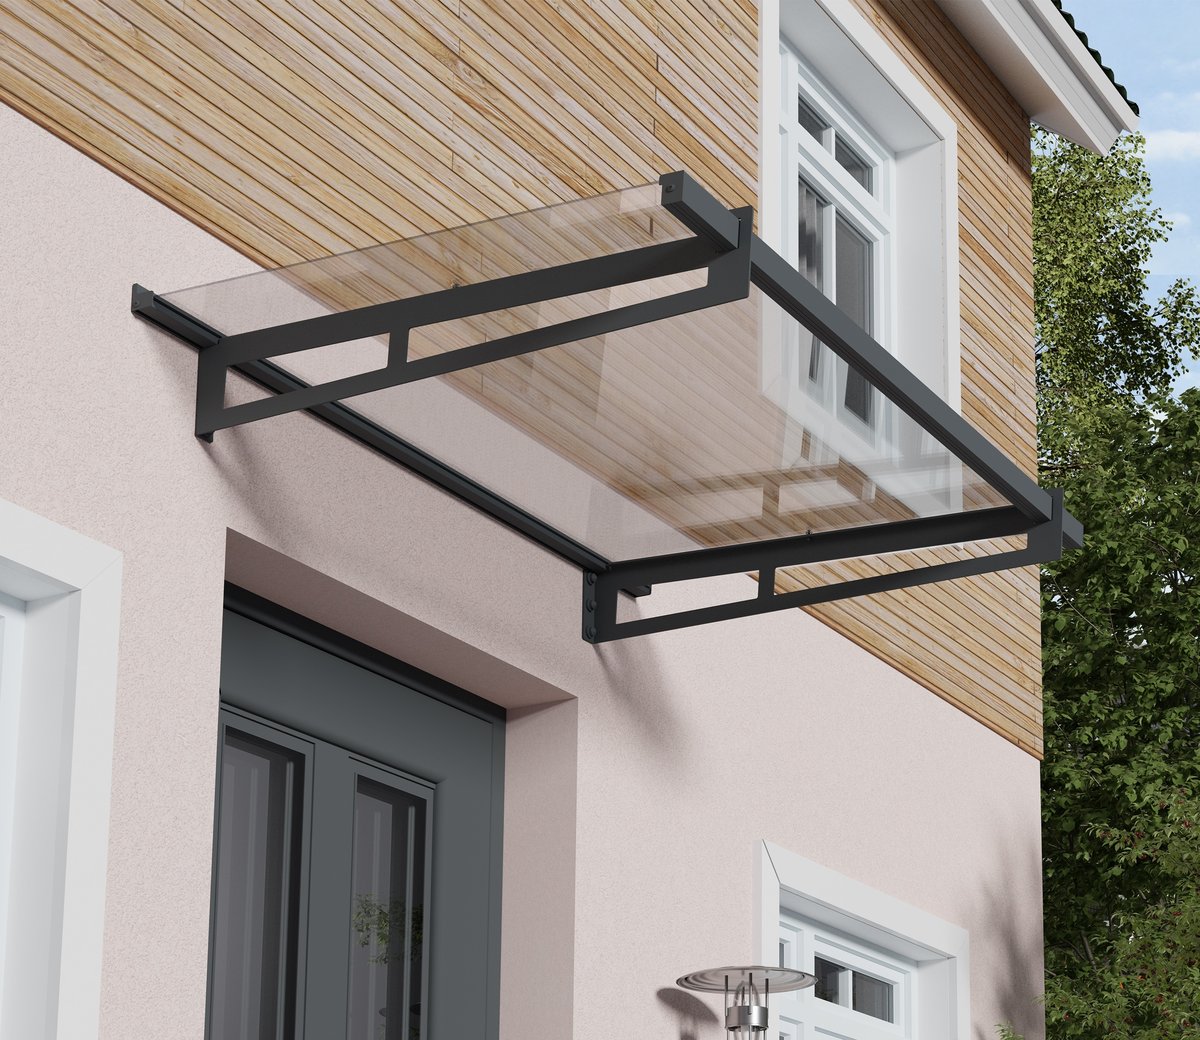 Bremen door awning canopy products